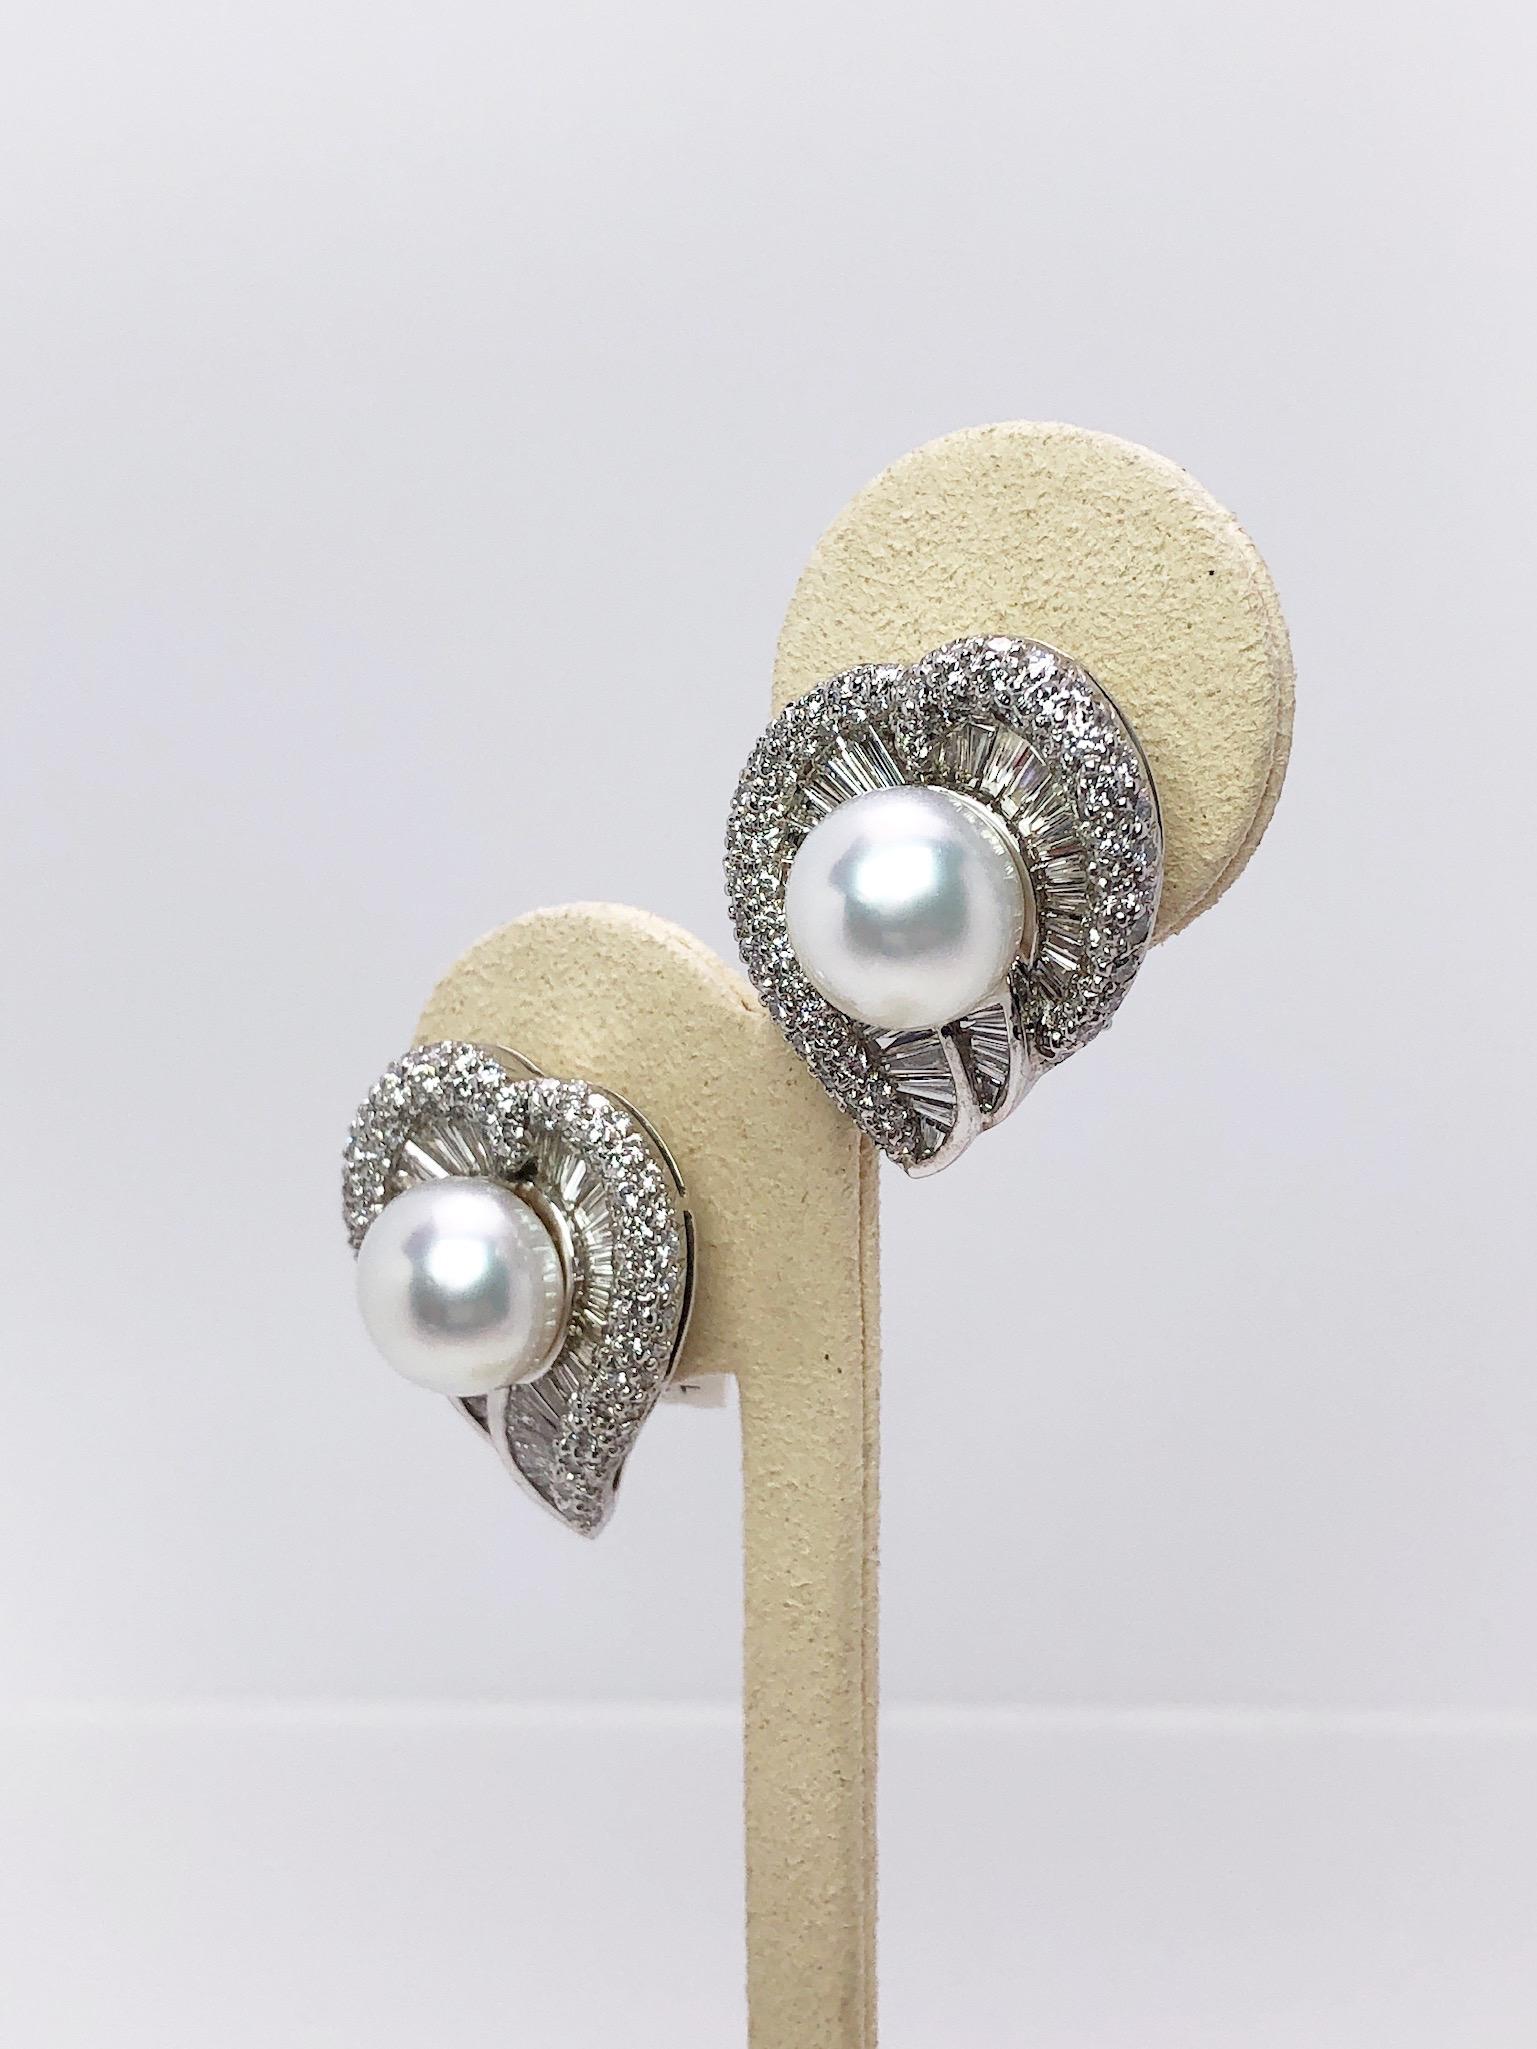 Cellini exclusive earrings.
These earrings are designed as a graceful leaf shape. They are set with Tapered Baguette Cut and Round Brilliant Diamonds. The earrings center 11.5 mm South Sea Pearls. The earrings are pierced with posts and a clip , but